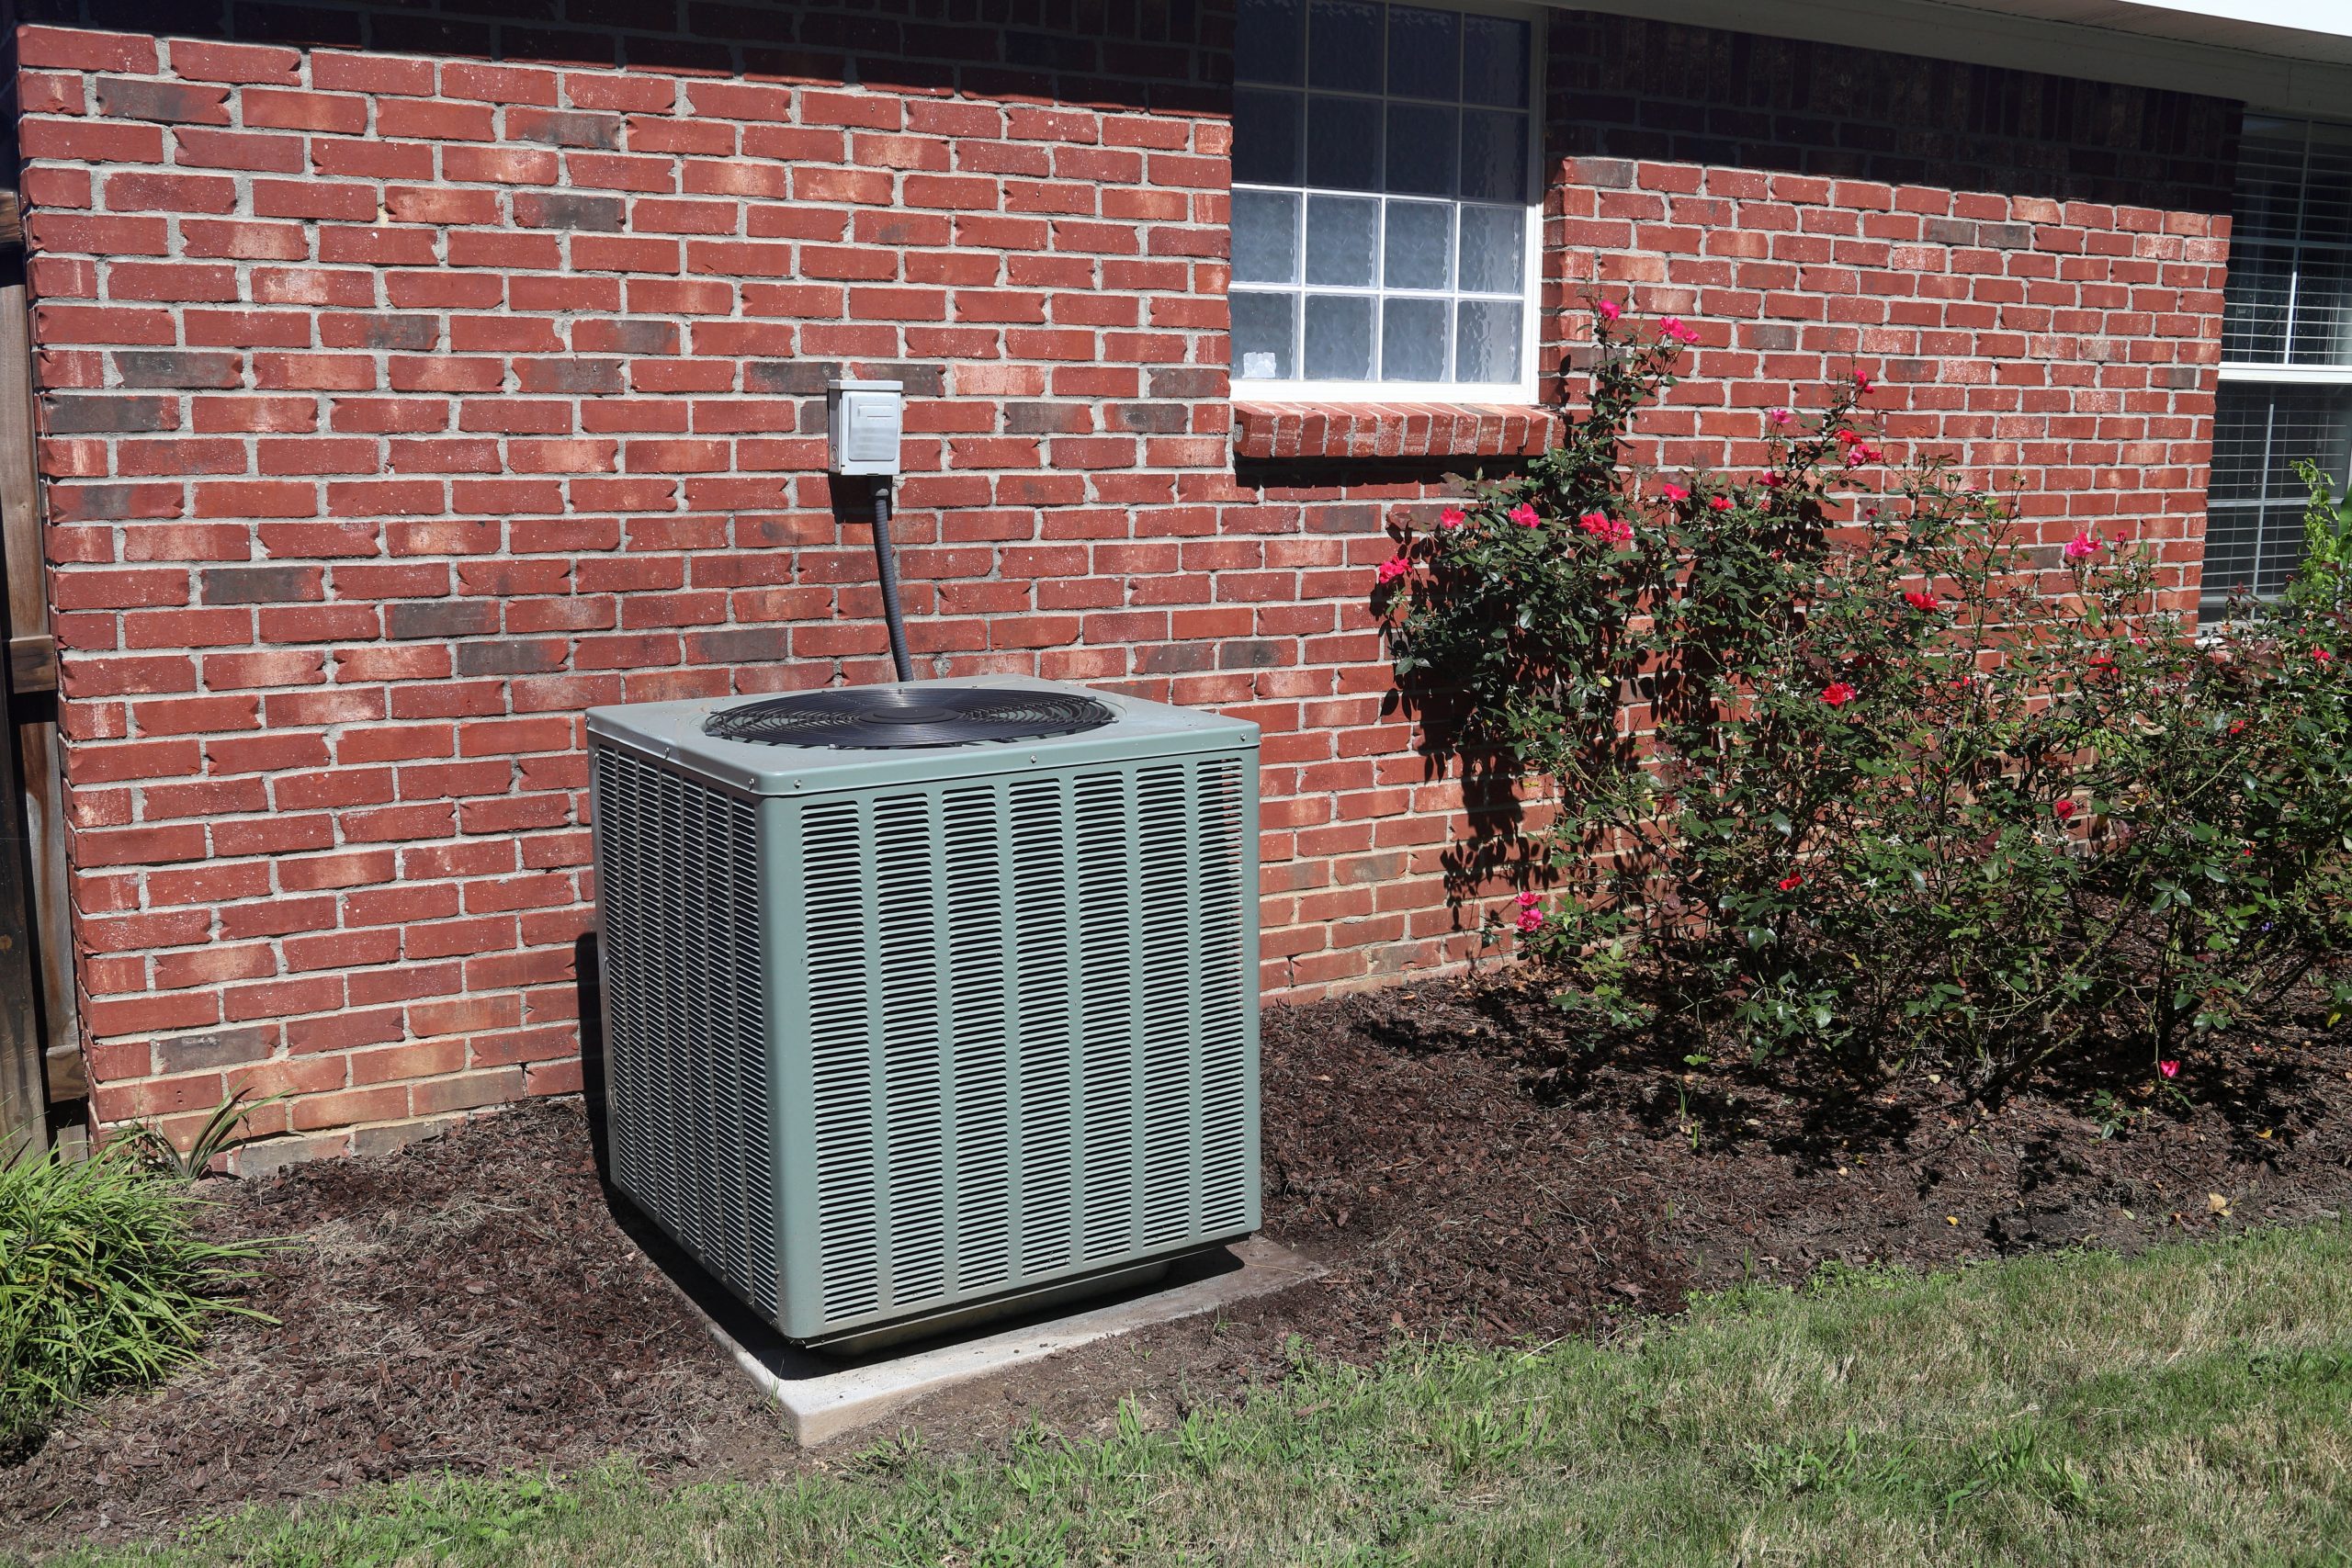 Air Conditioner system next to a home, with rose bushes and brick wall.